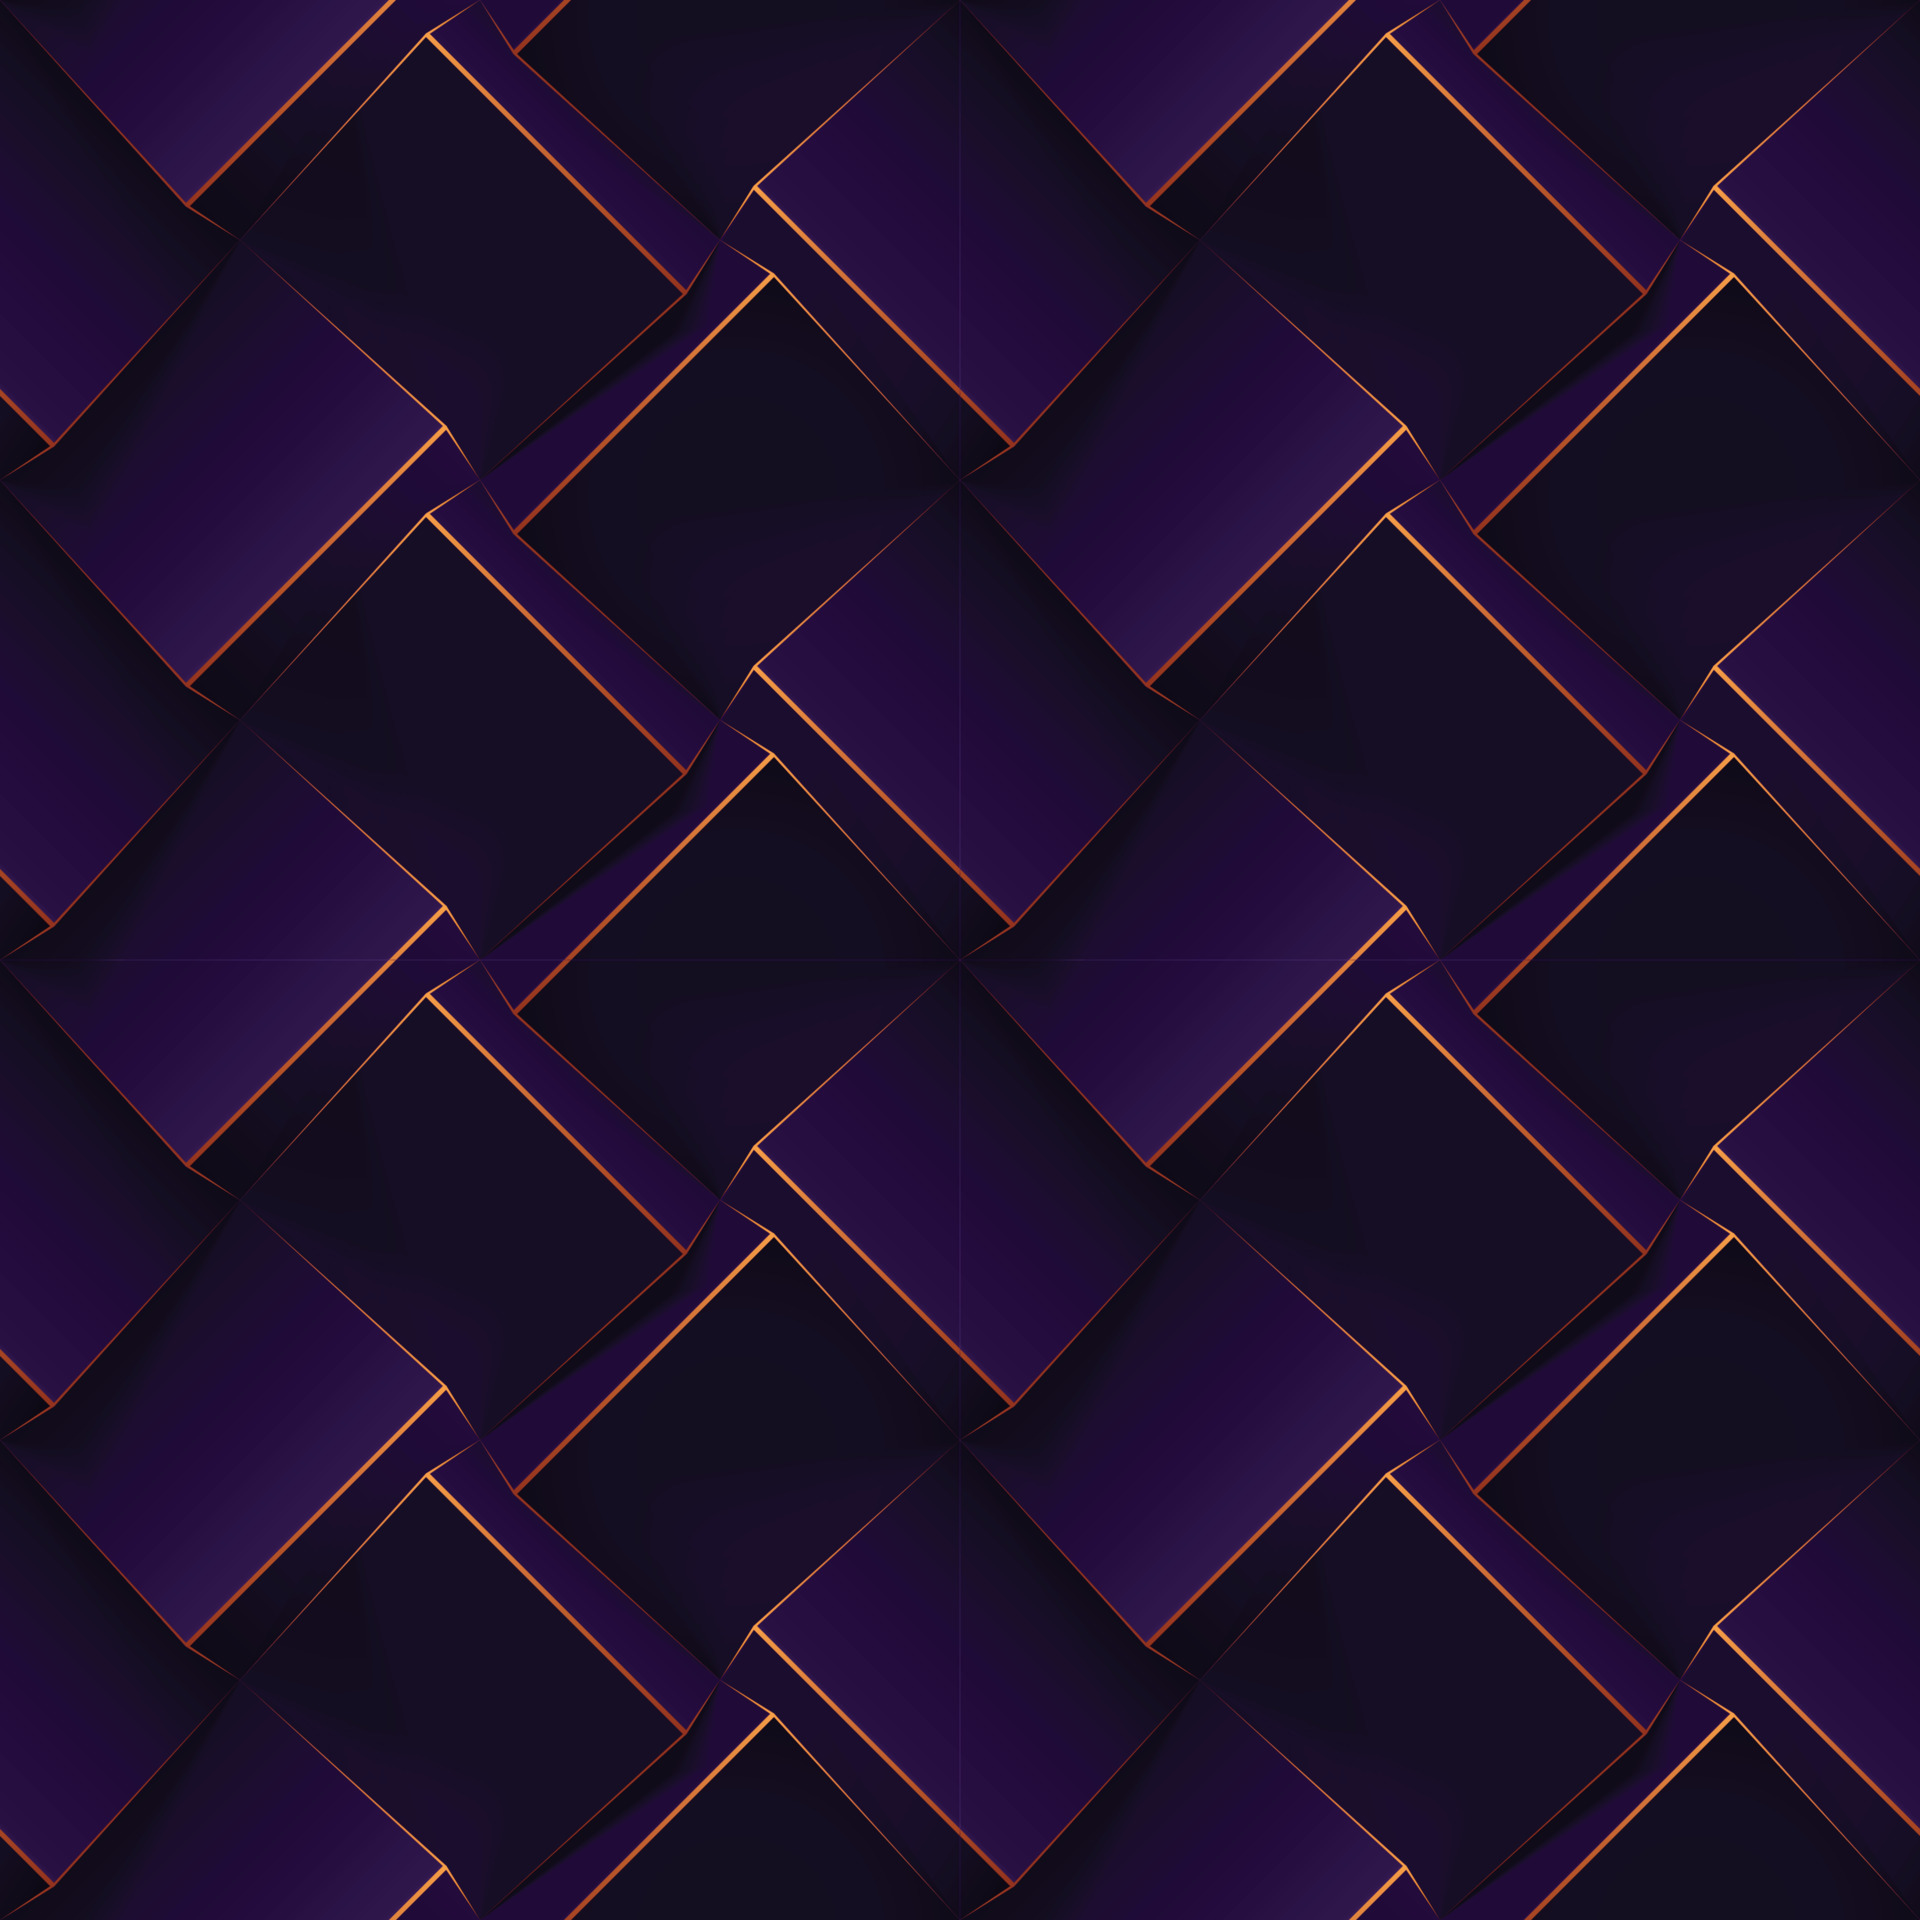 Buy Generic Modern 3D Abstract Geometric Wallpaper Roll for Room Bedroom  Living Room Home Decor Embossed Wall PaperColor Purple Online at Low  Prices in India  Amazonin